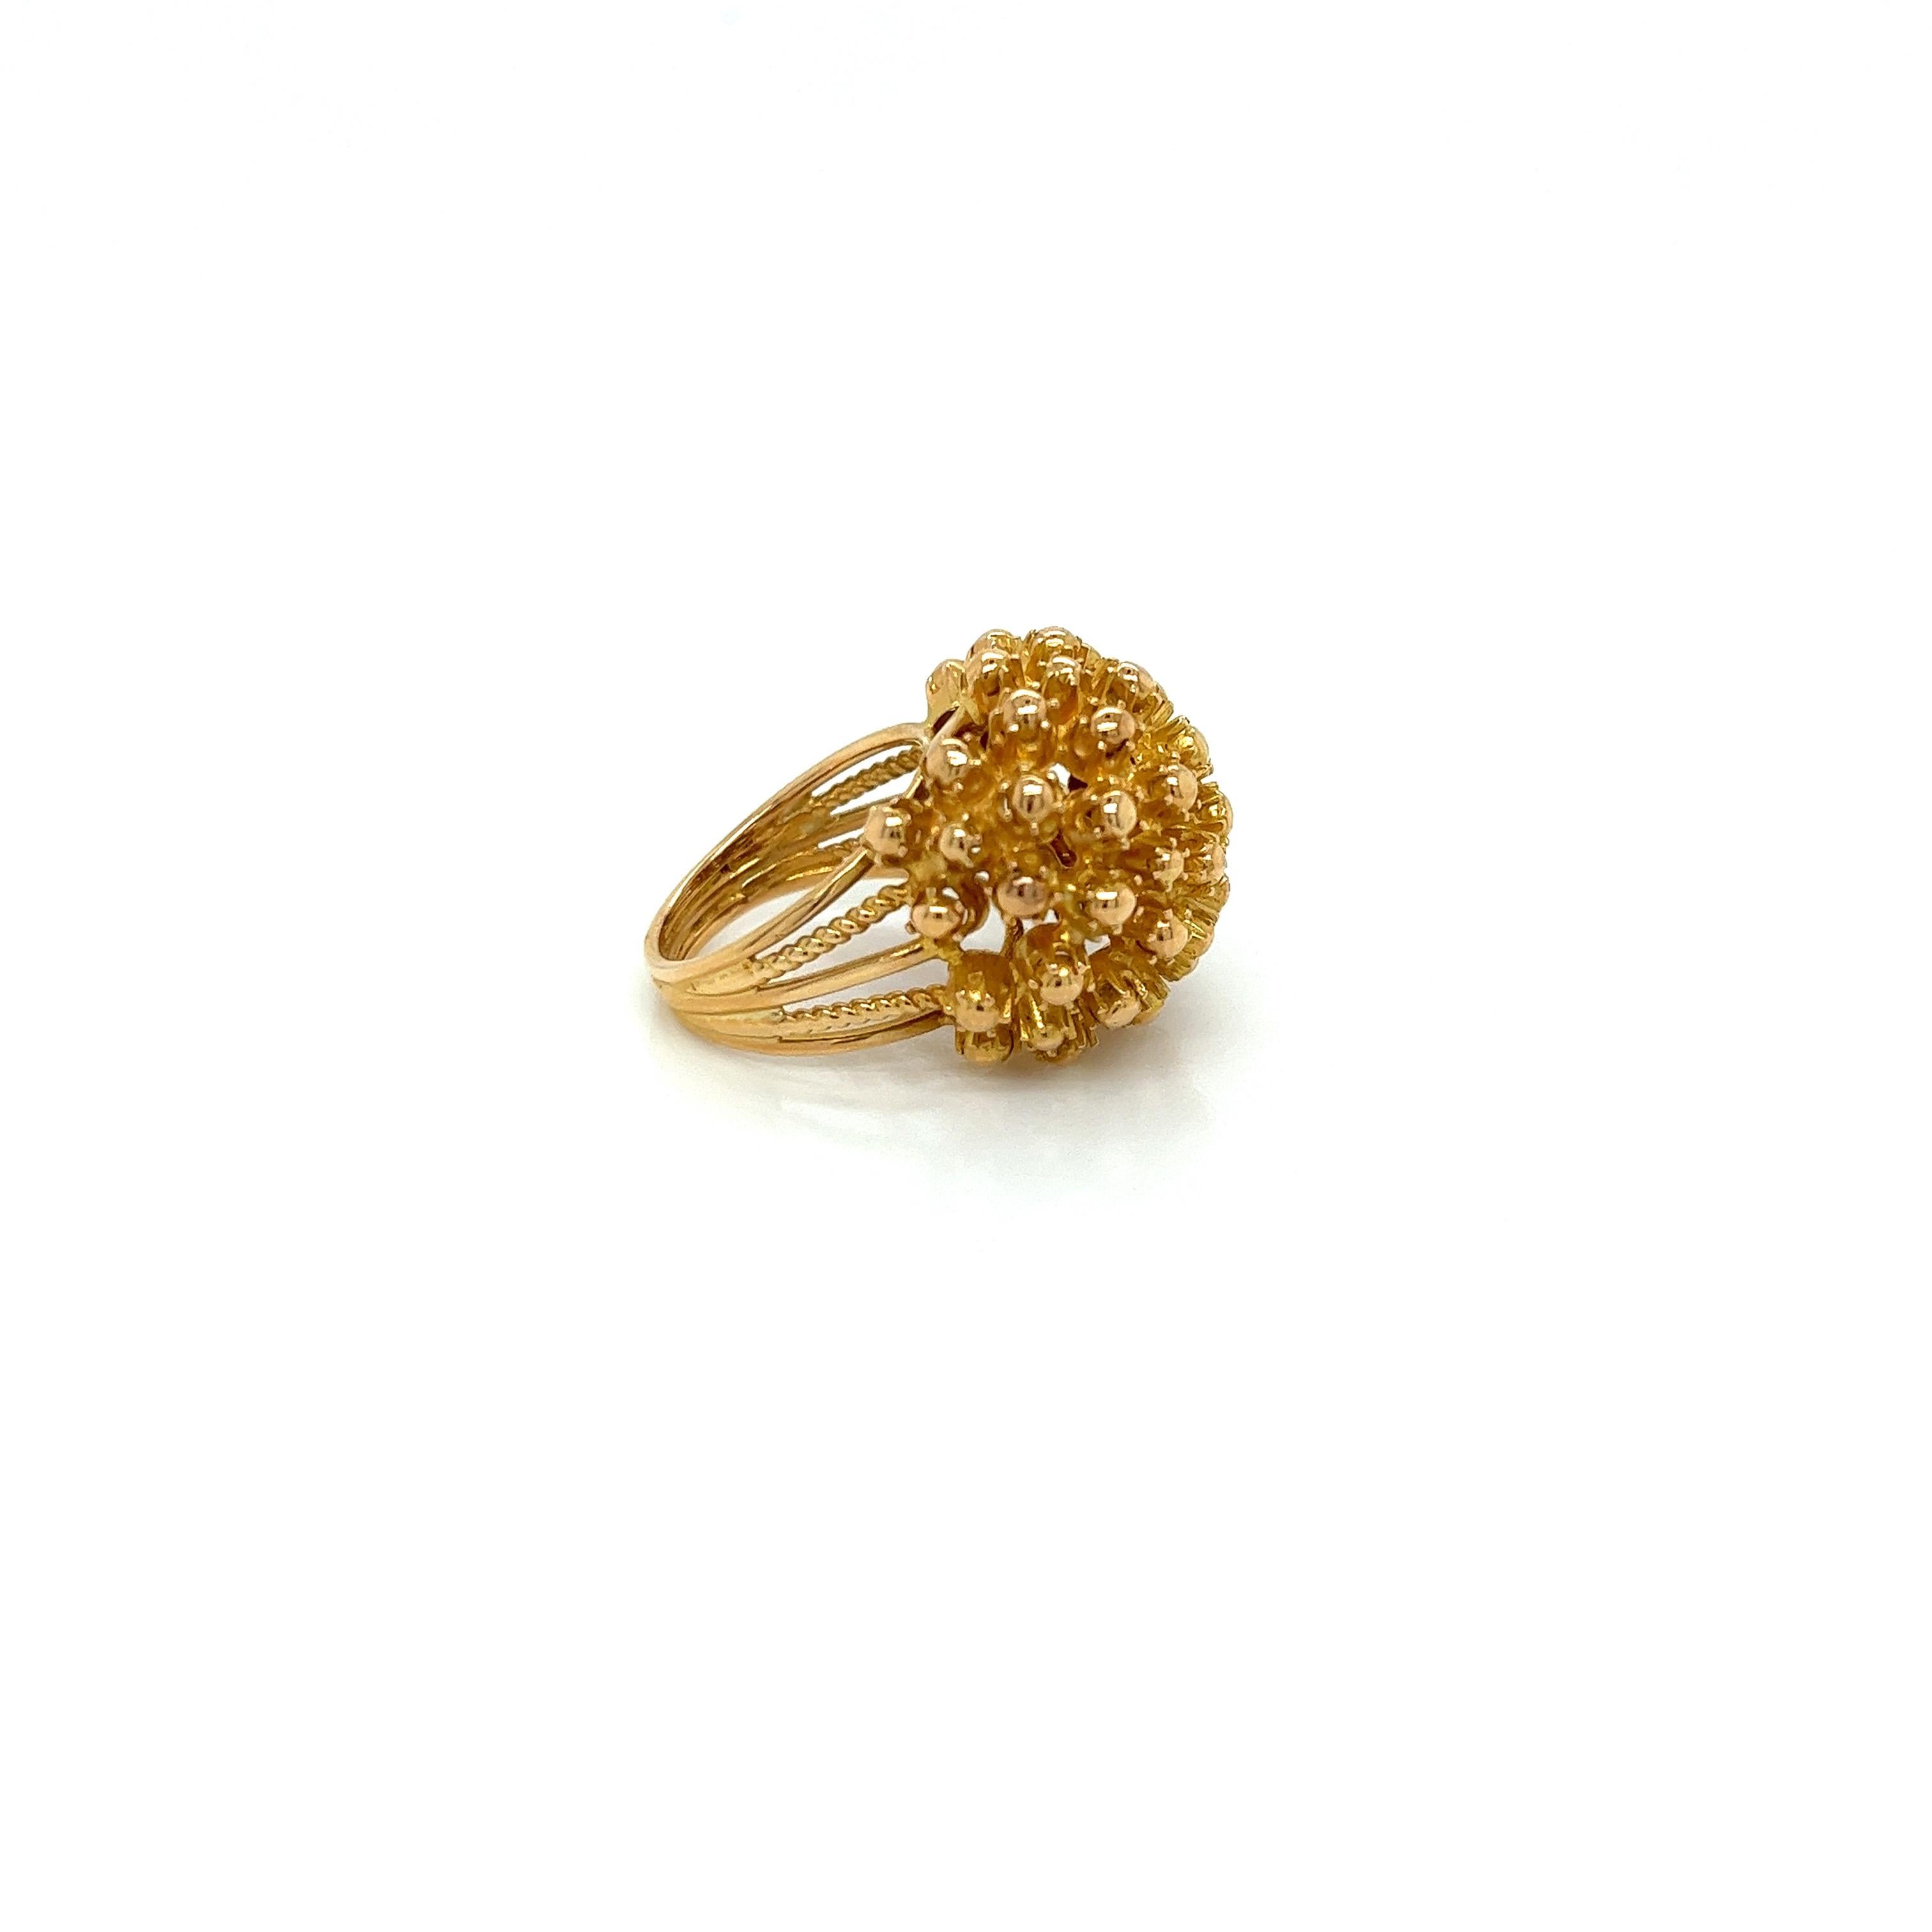 Vintage 1980's 18k Yellow Gold Flower Statement Ring. The 18ky flower measures 19mm wide and 12mm high off the finger. The 5 row split band measures 9mm wide and tapers to 3.5mm wide on the bottom. The finger size is 4 and it can be sized upon